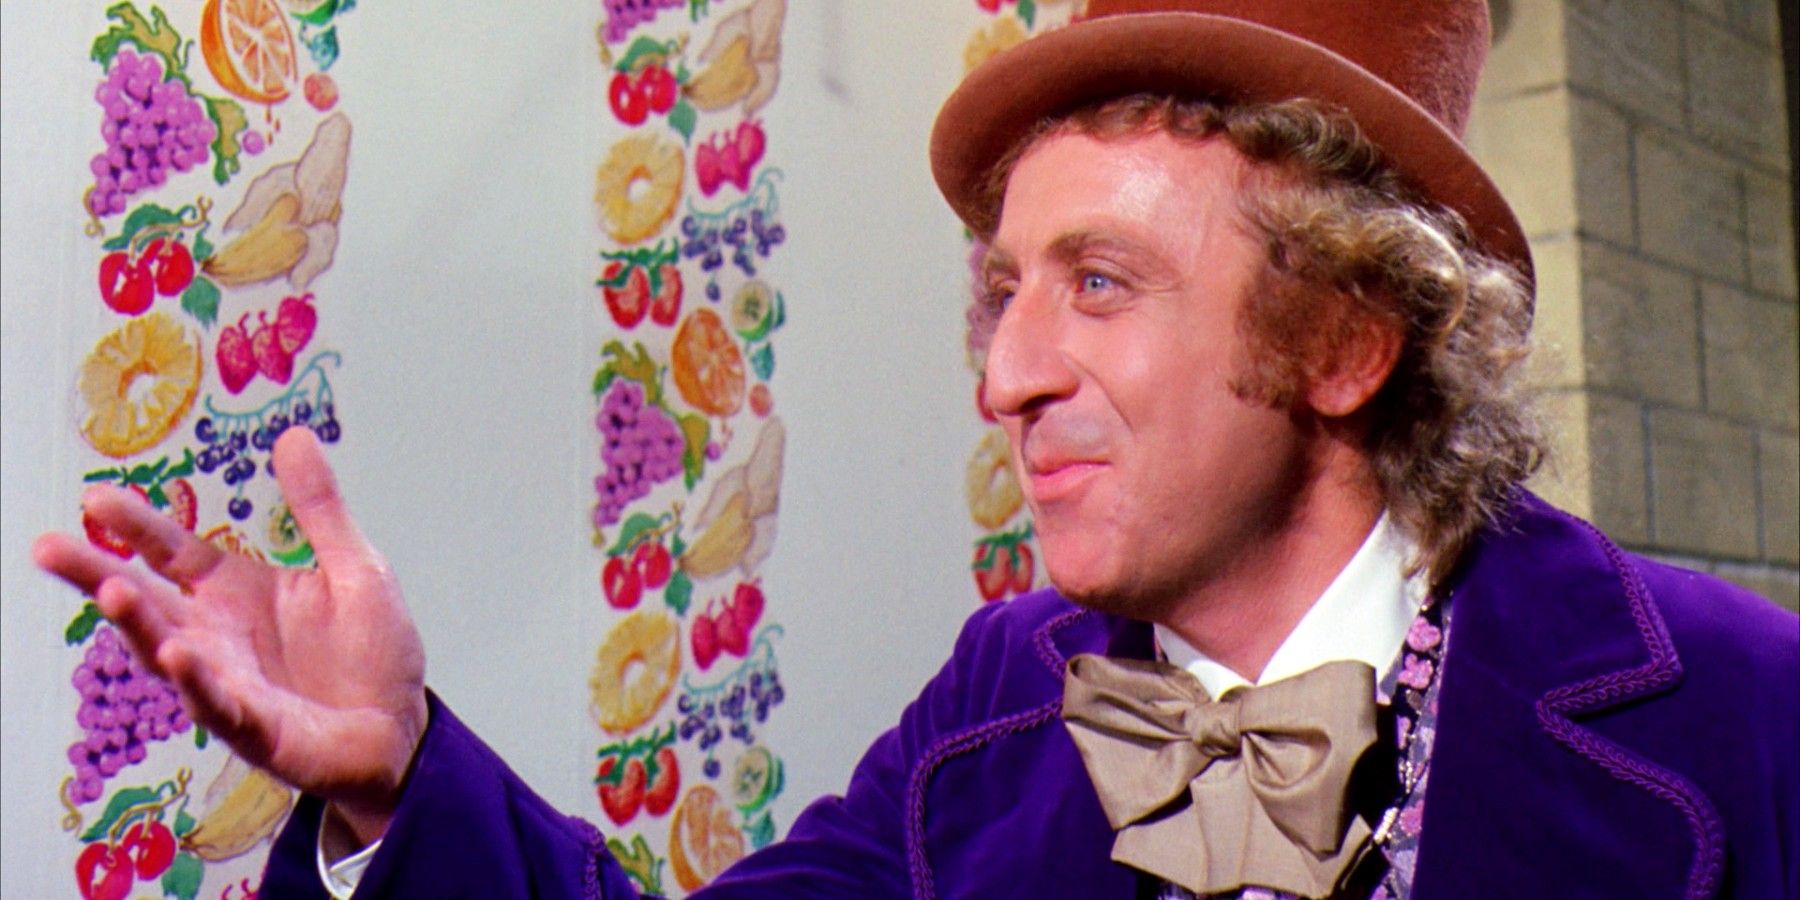 Gene Wilder in Willy Wonka and the Chocolate Factory smiling and wearing a purple suit and top hat